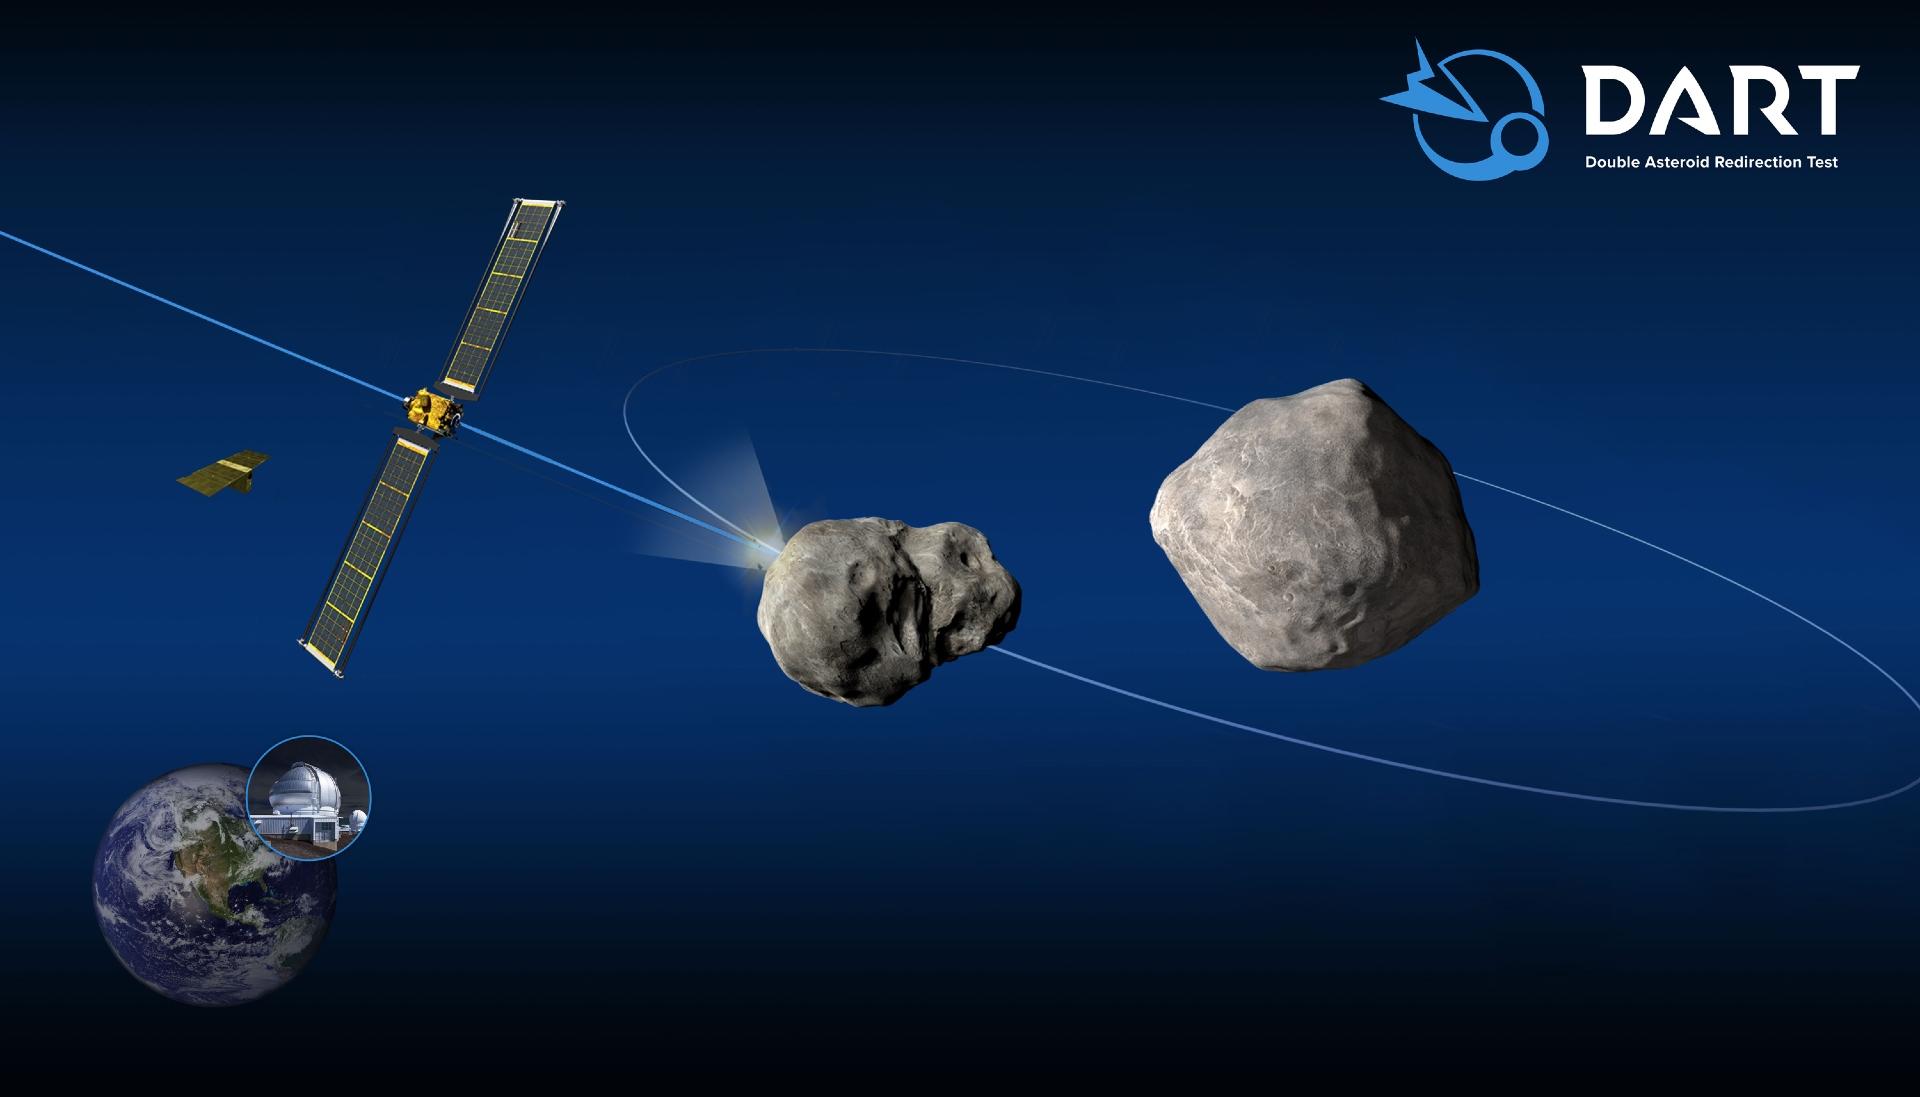 Schematic of the DART mission shows the impact on the moonlet of asteroid (65803) Didymos. Post-impact observations from Earth-based optical telescopes and planetary radar would, in turn, measure the change in the moonlet’s orbit about the parent body. (Credit: NASA / Johns Hopkins Applied Physics Lab)